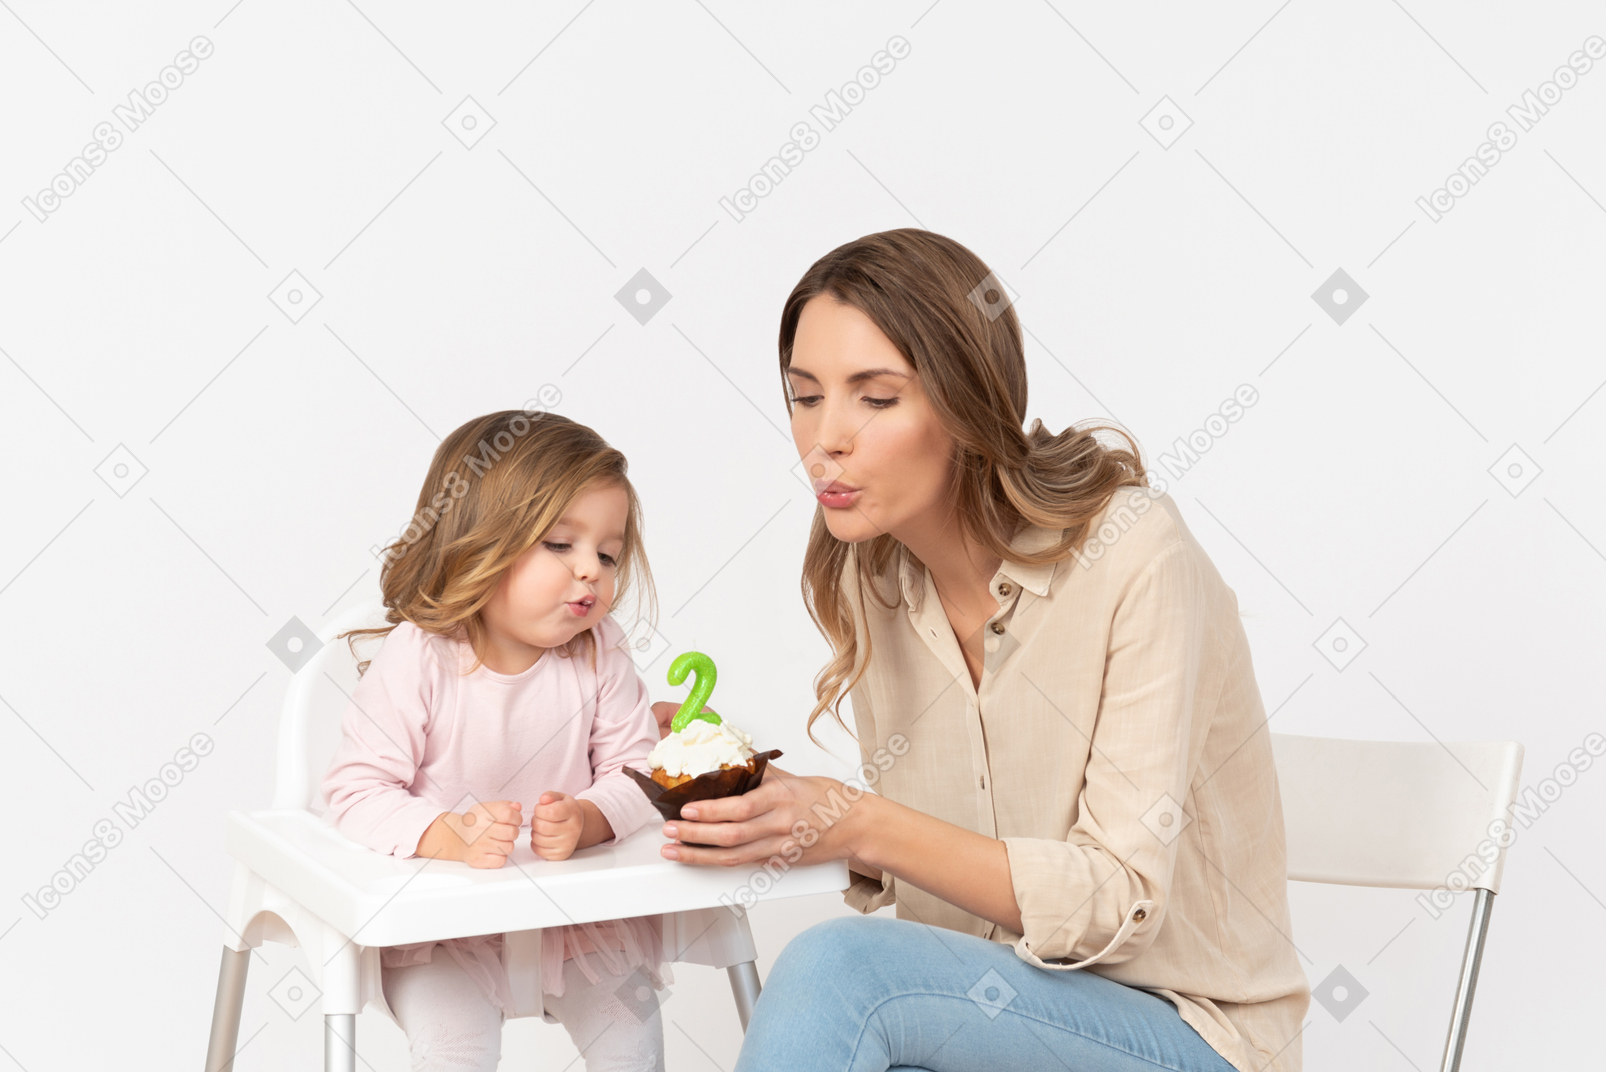 Baby girl blowing out a candle as her mother's holding a birthday cake